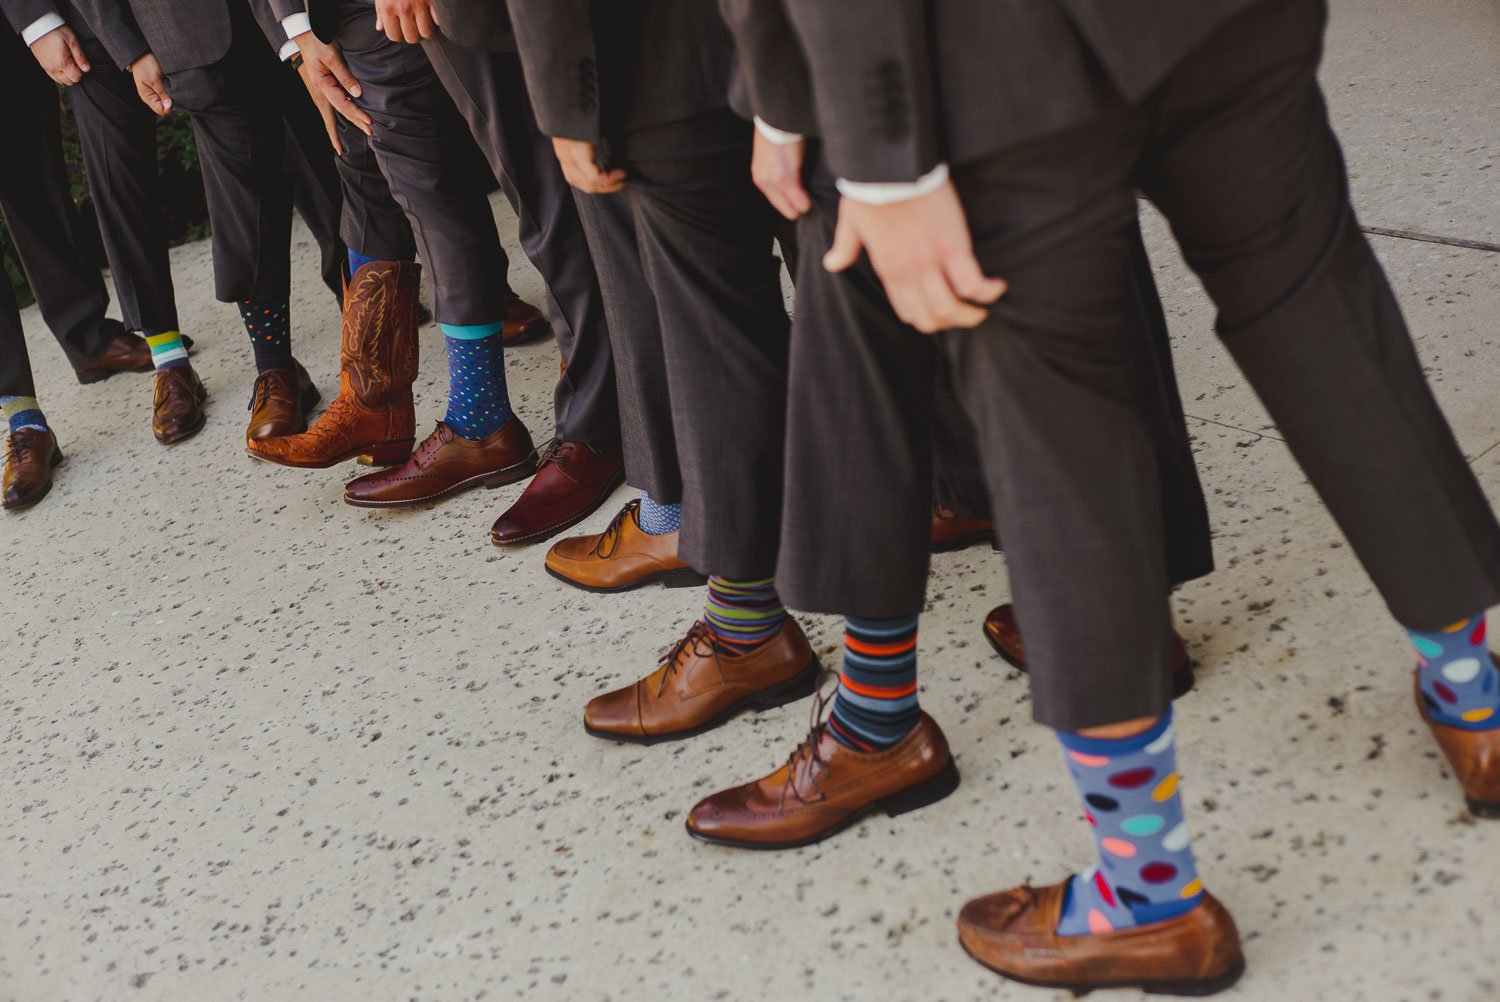 Groomsmen show socks during group photo session at -Paniolo Ranch Wedding Reception-Philip Thomas